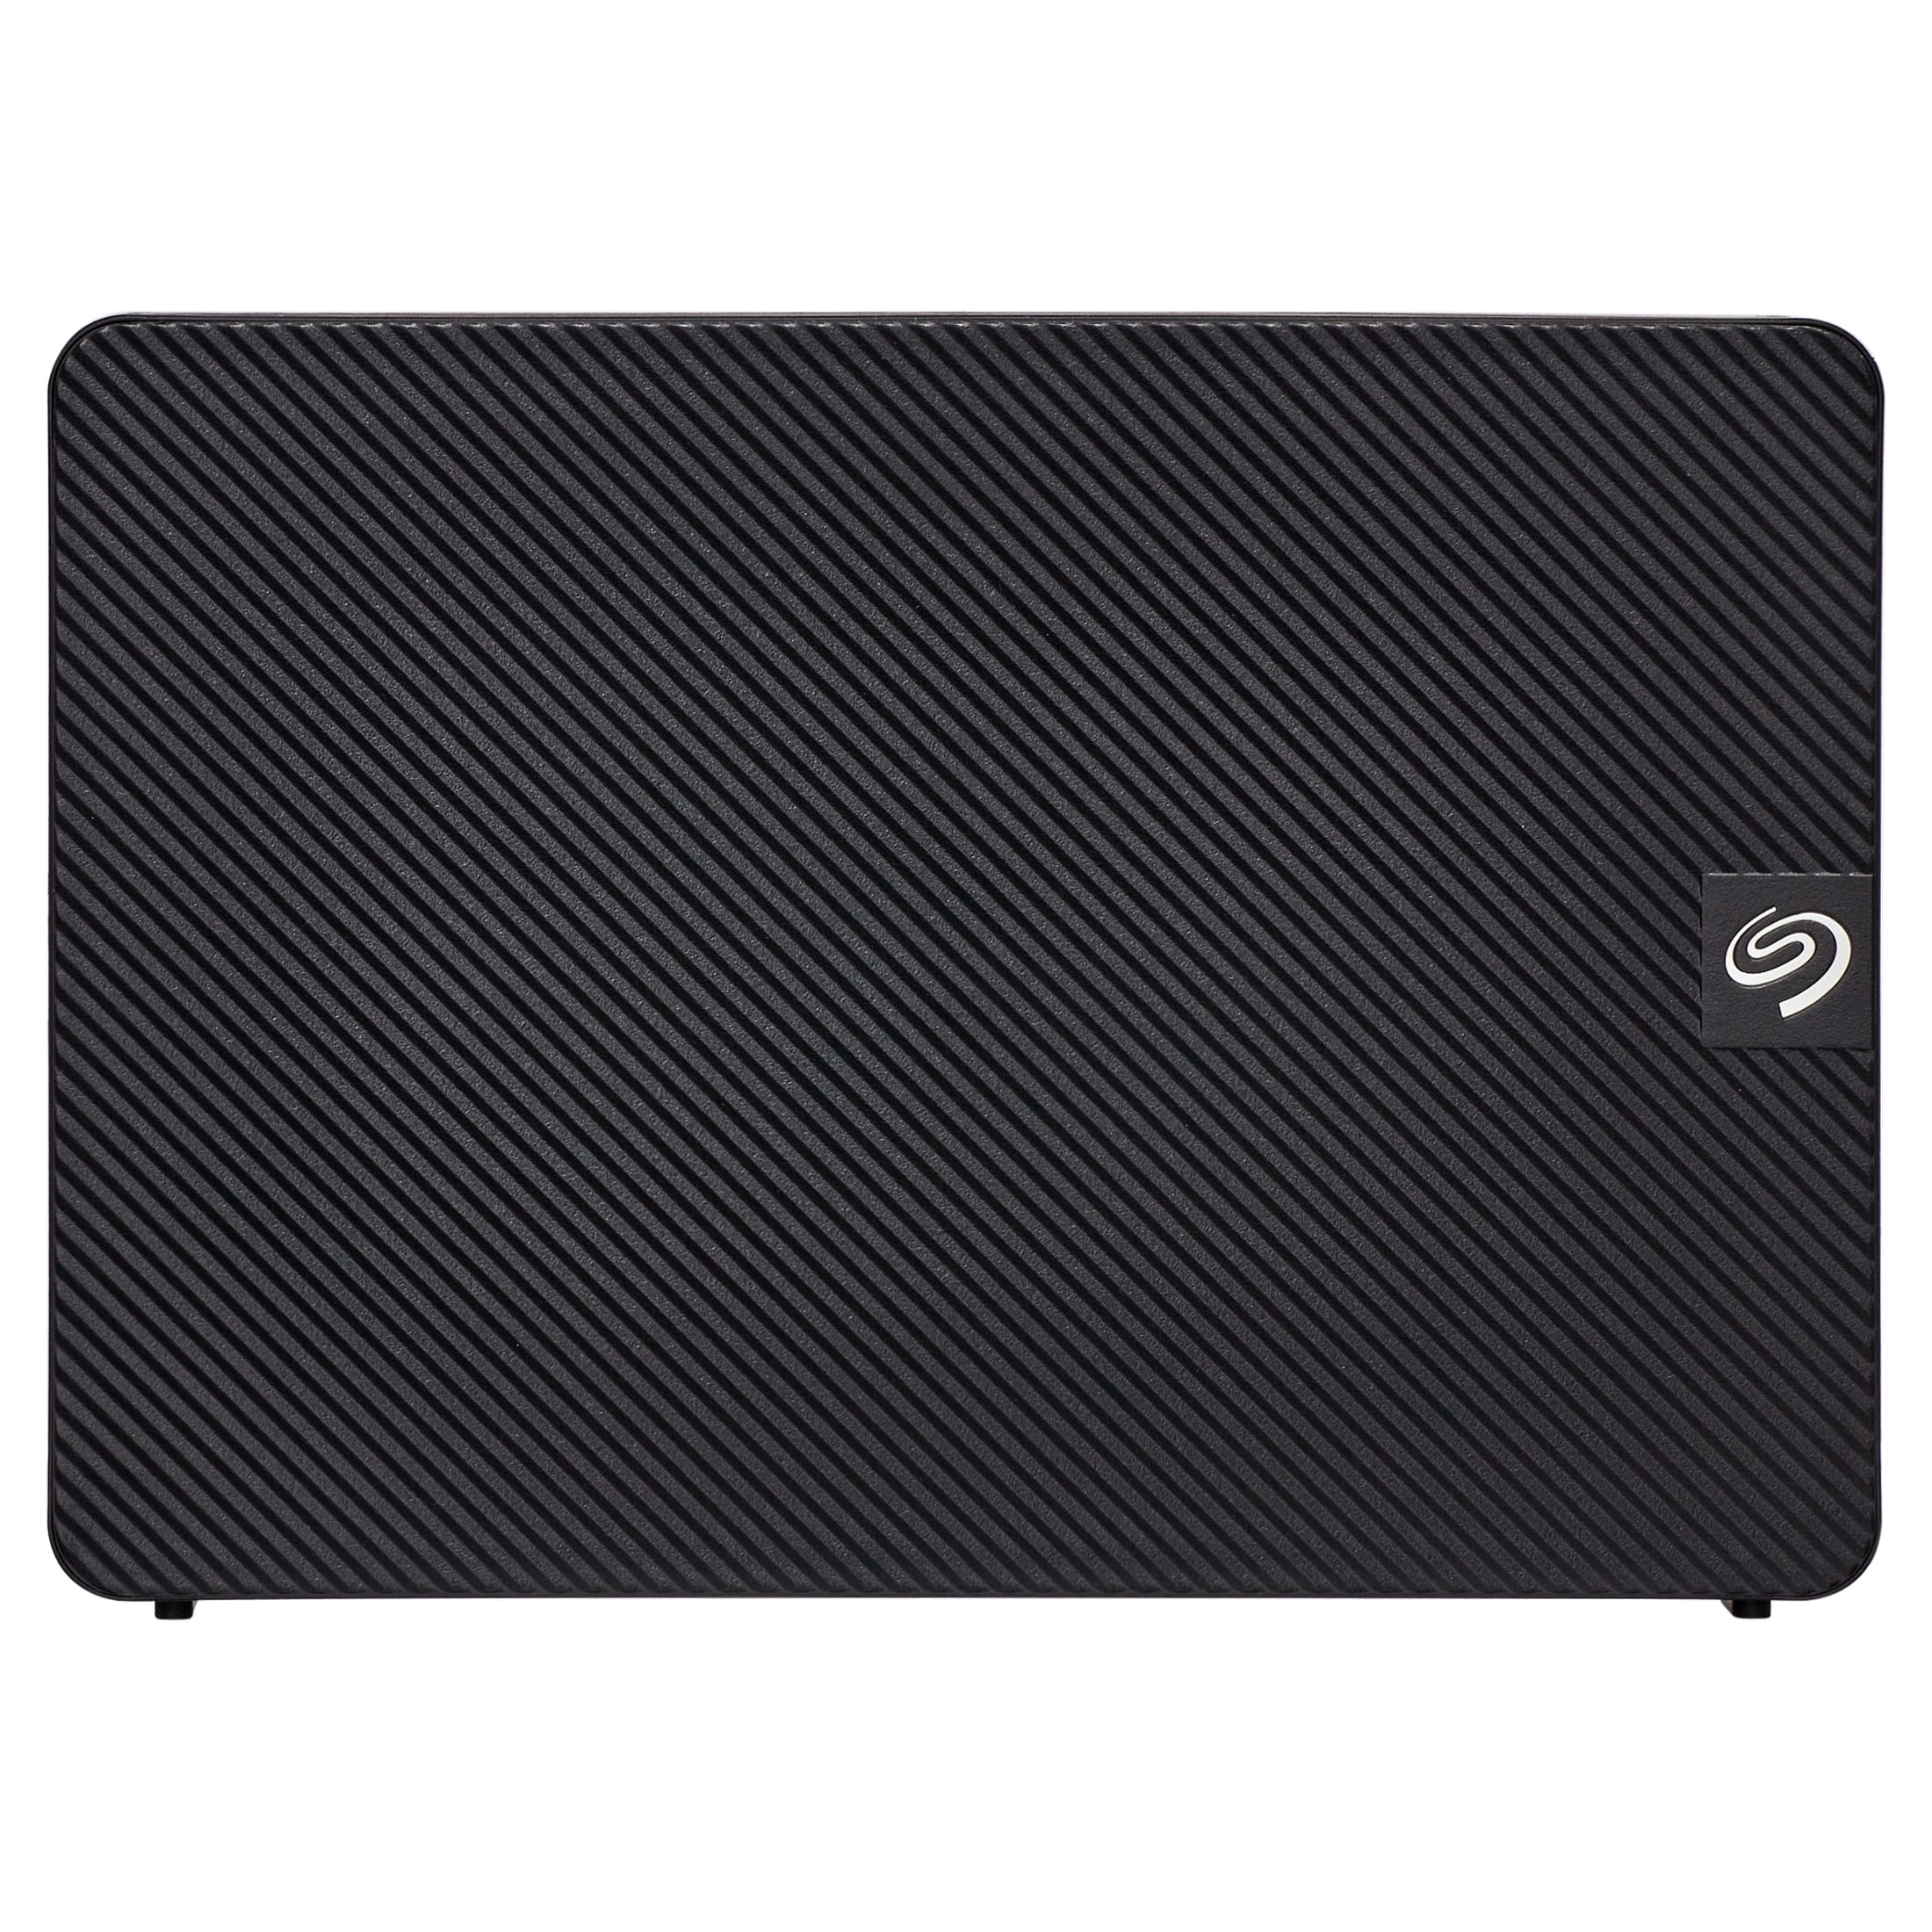 Disque dur externe Seagate Game Drive Hub (STKW8000400) - 8 To